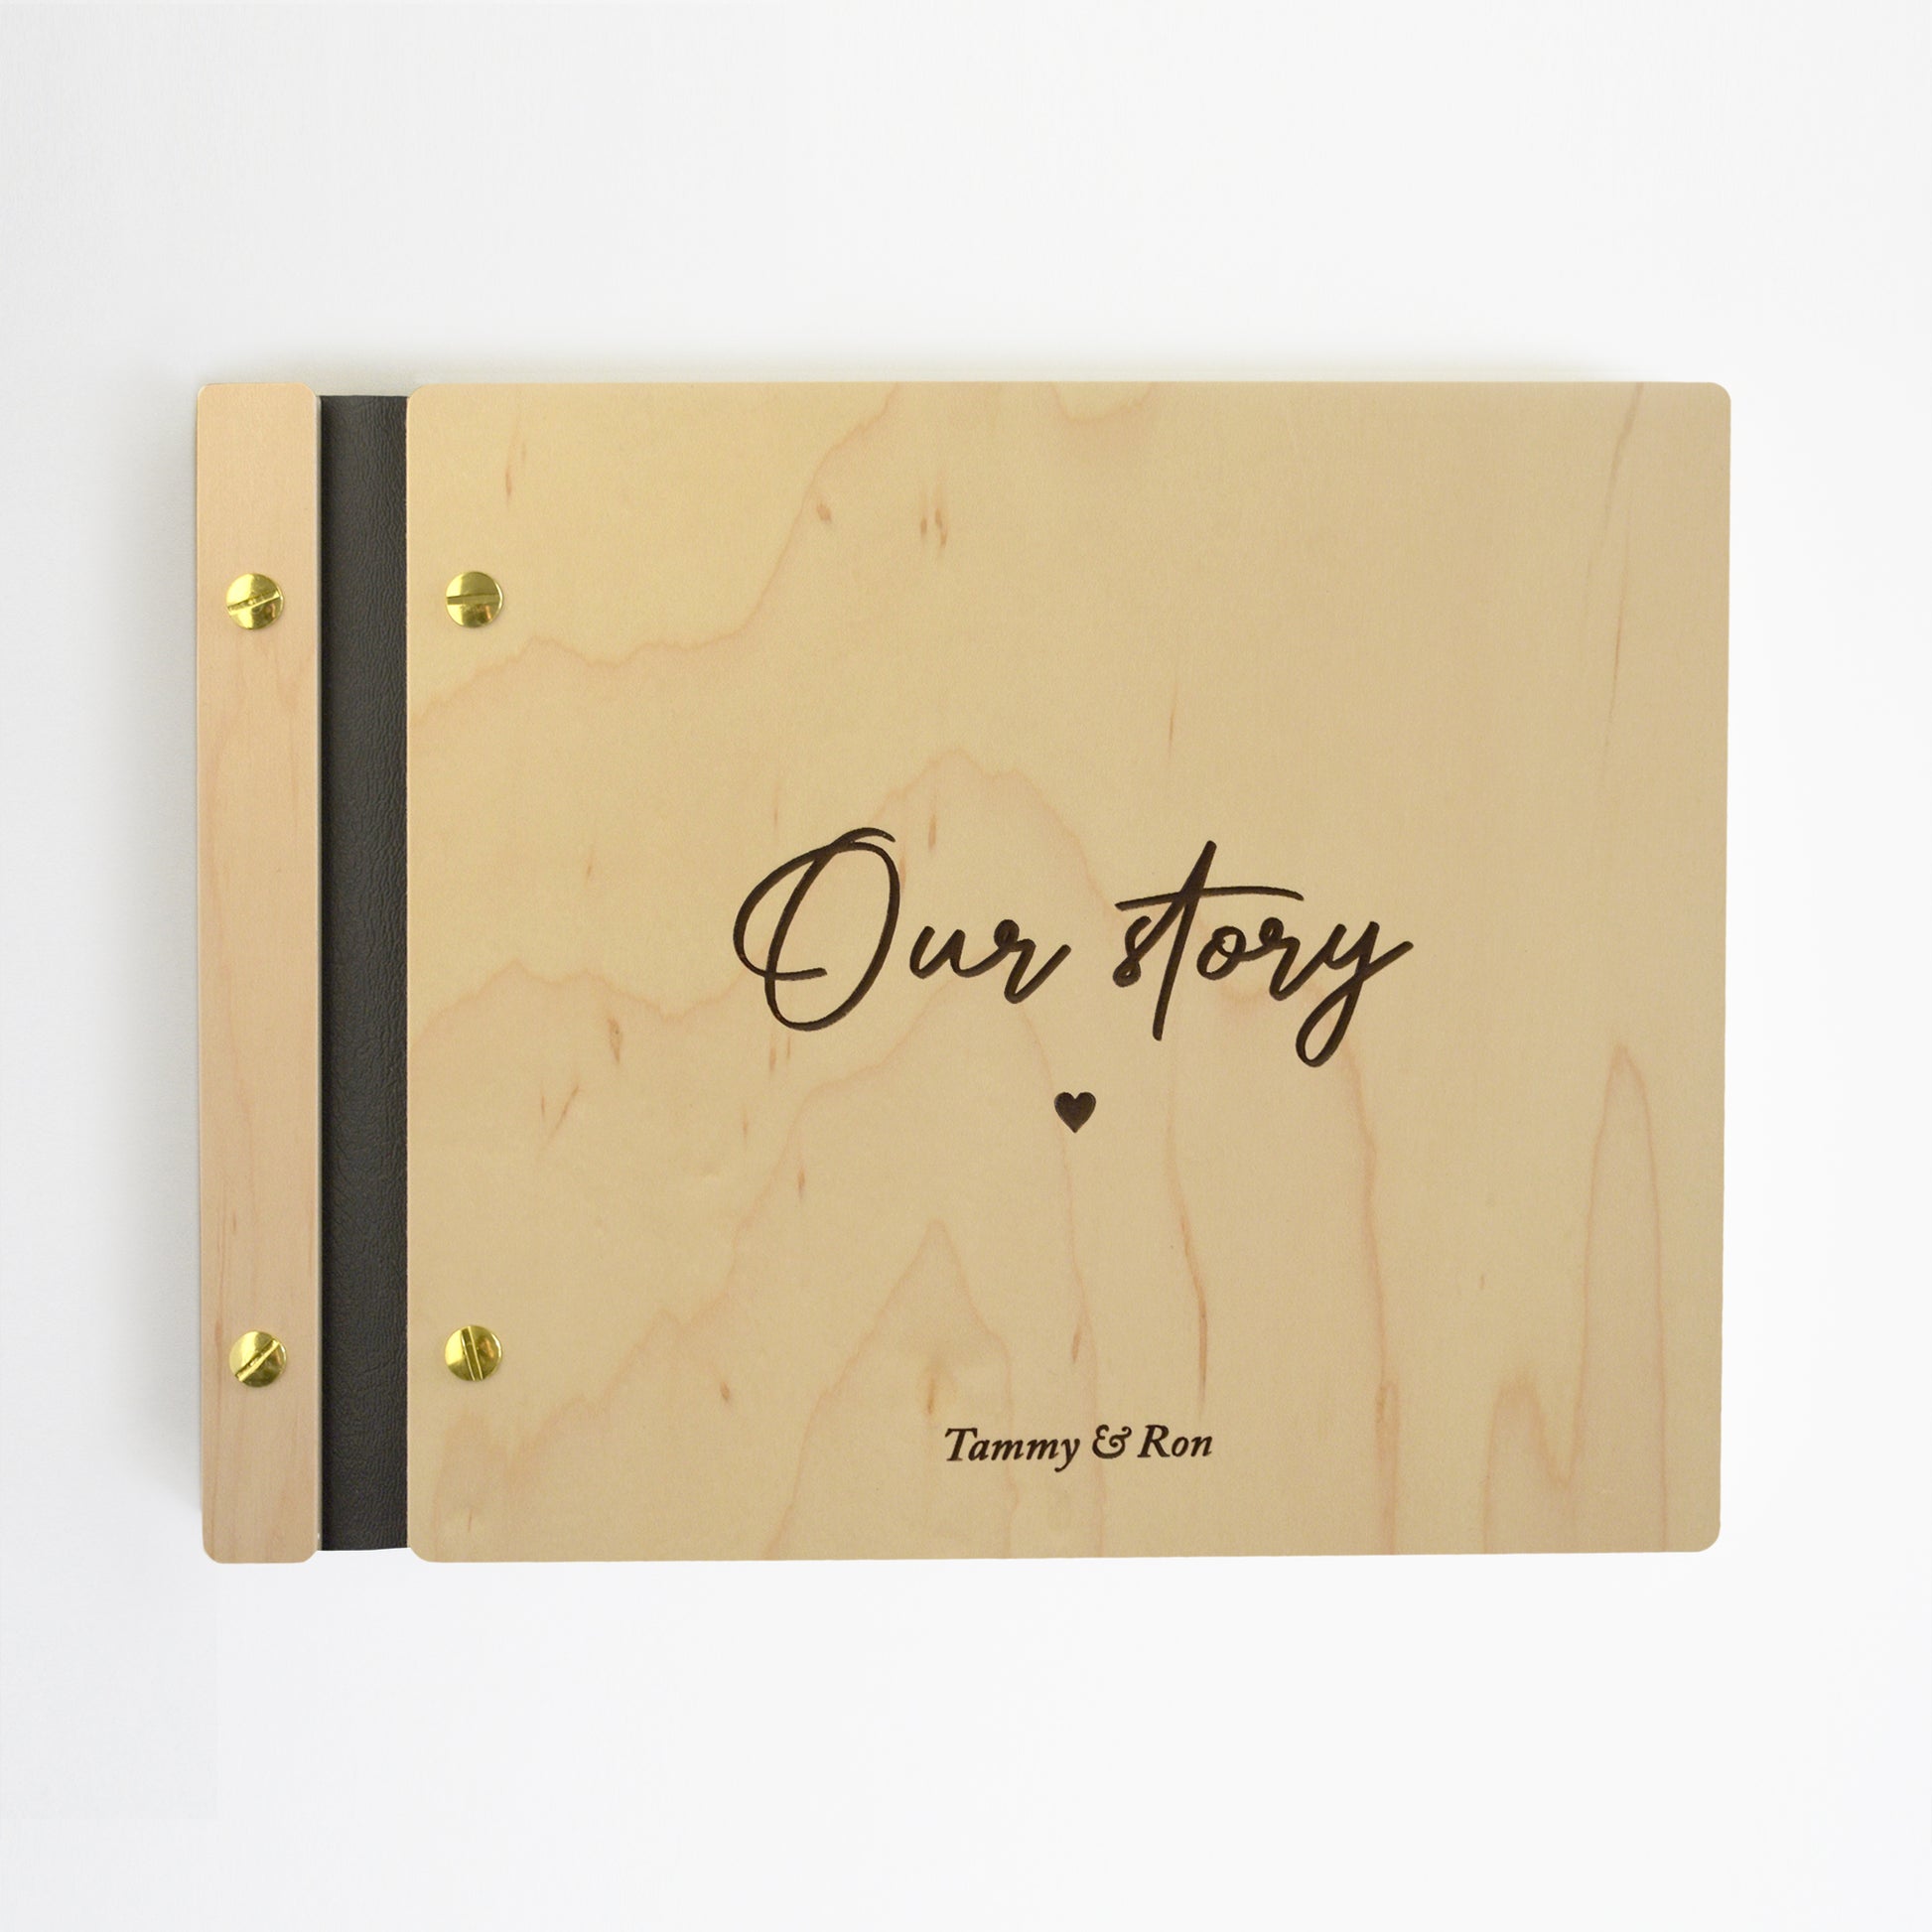 An 8.5x11" guest book lies on a table. Made of maple wood, black vegan leather binding, and gold hardware. The front cover reads “Our Story, Ron & Tammy.”